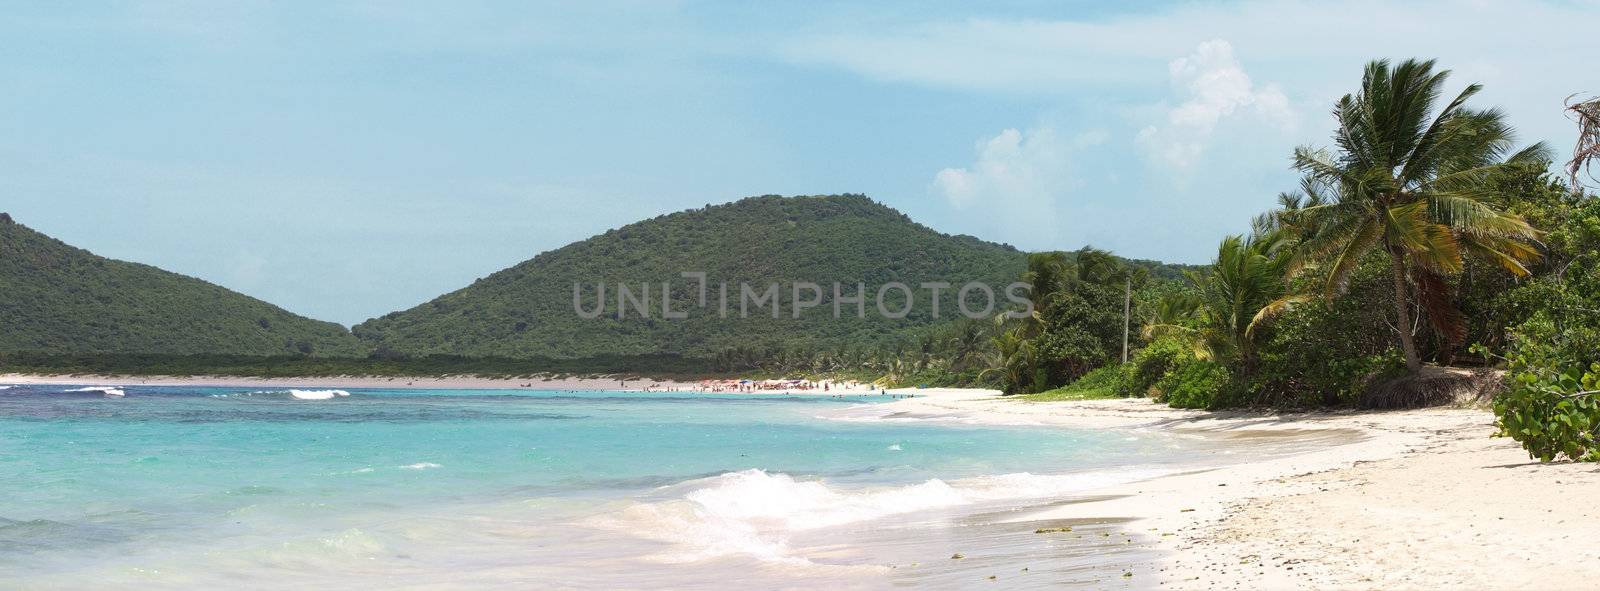 The amazing clear blue Caribbean water and white sands of Flamenco beach on the Puerto Rican island of Culebra.